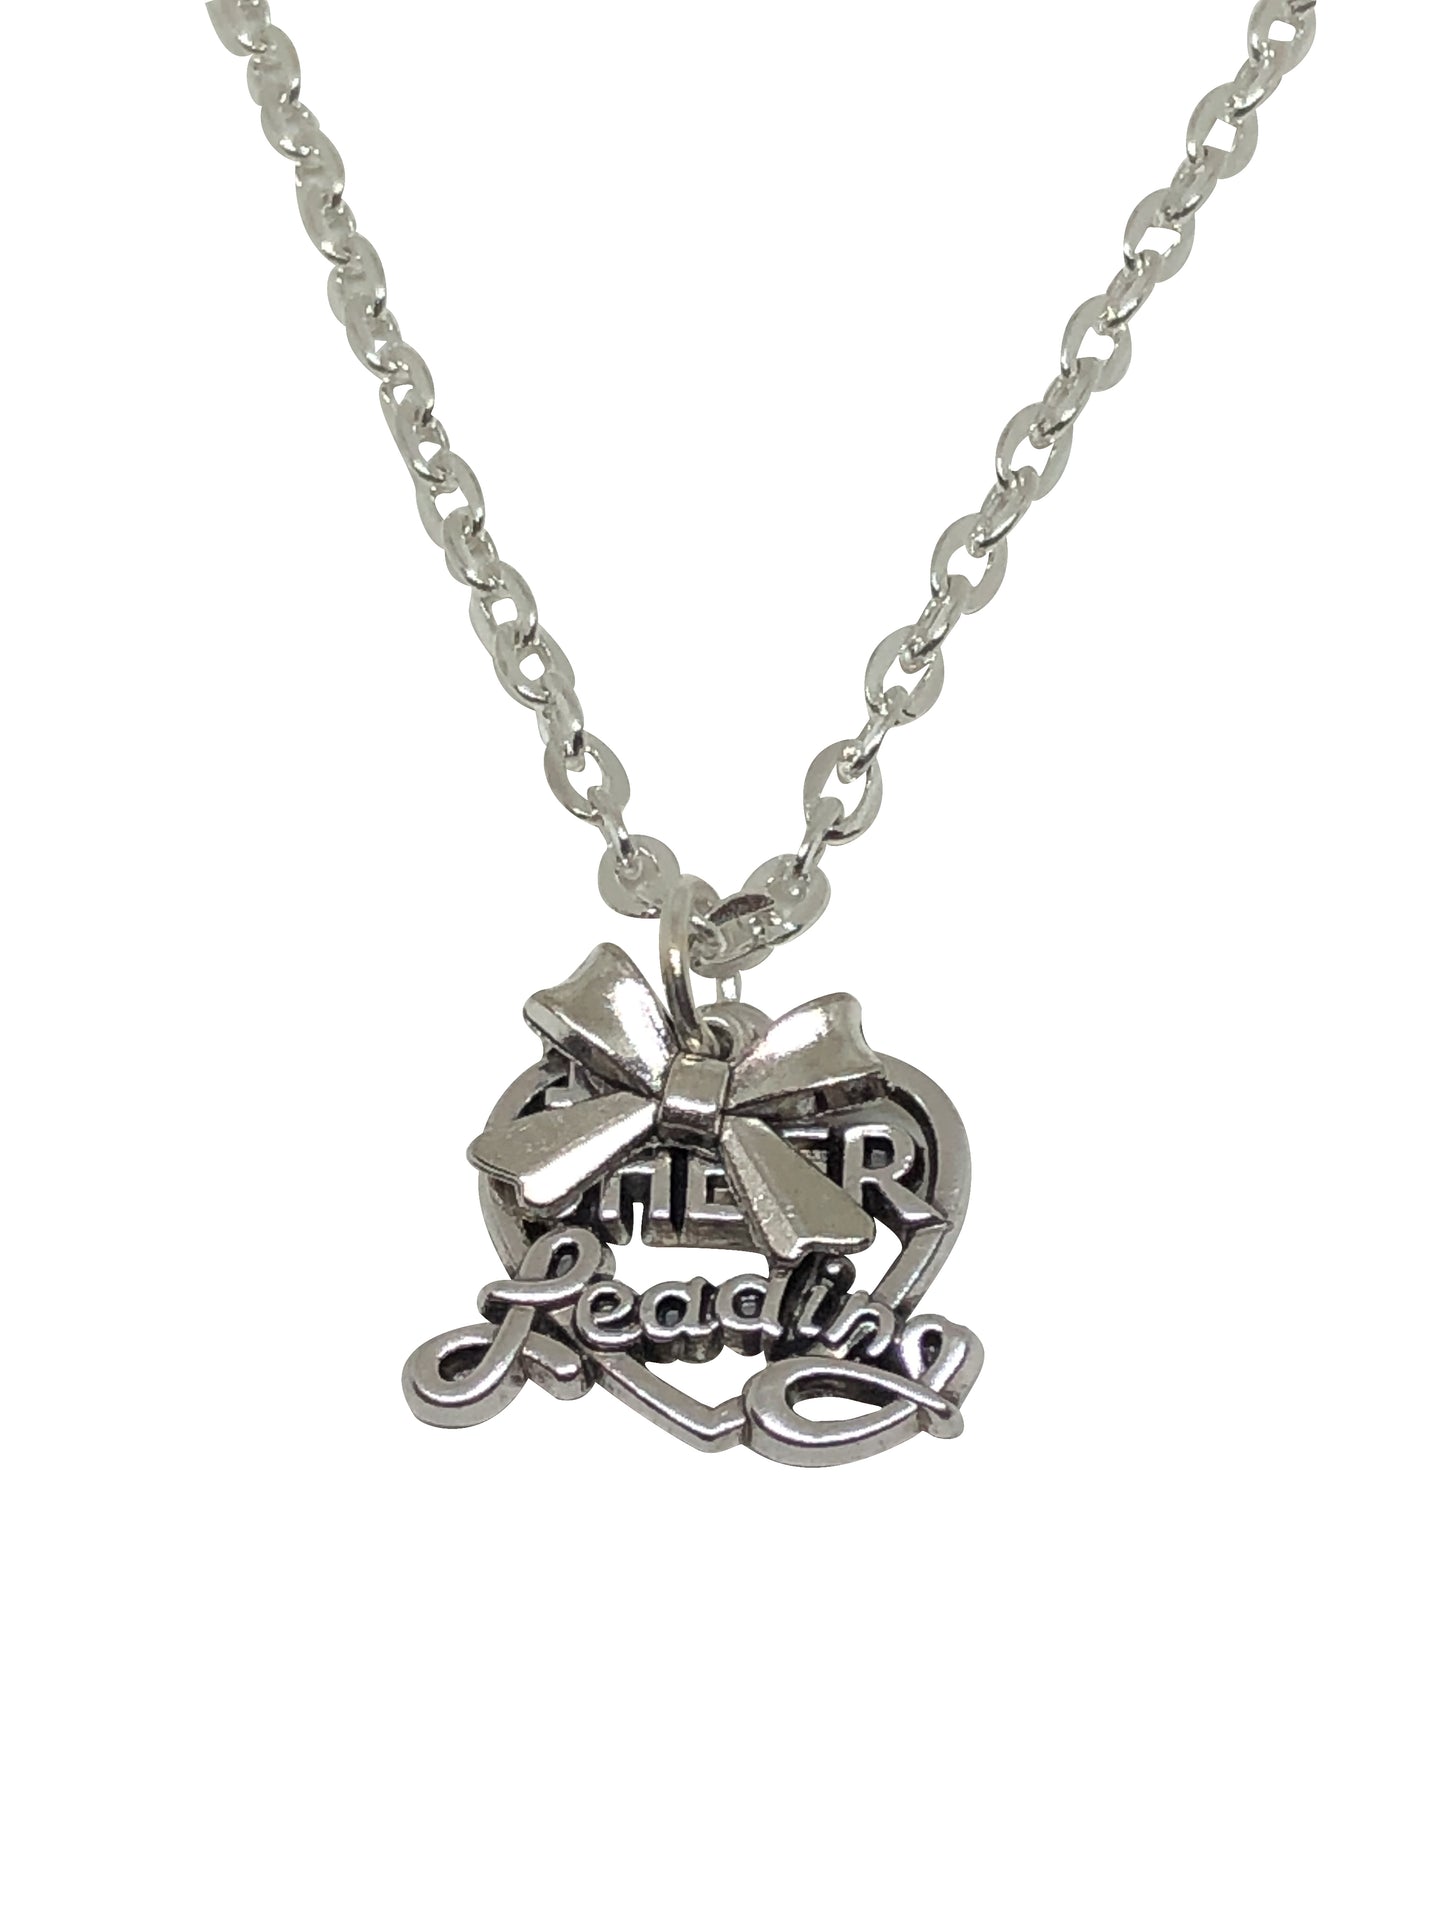 Cheerleading Double Charm Necklace with Bow - Silver - Cheer and Dance On Demand